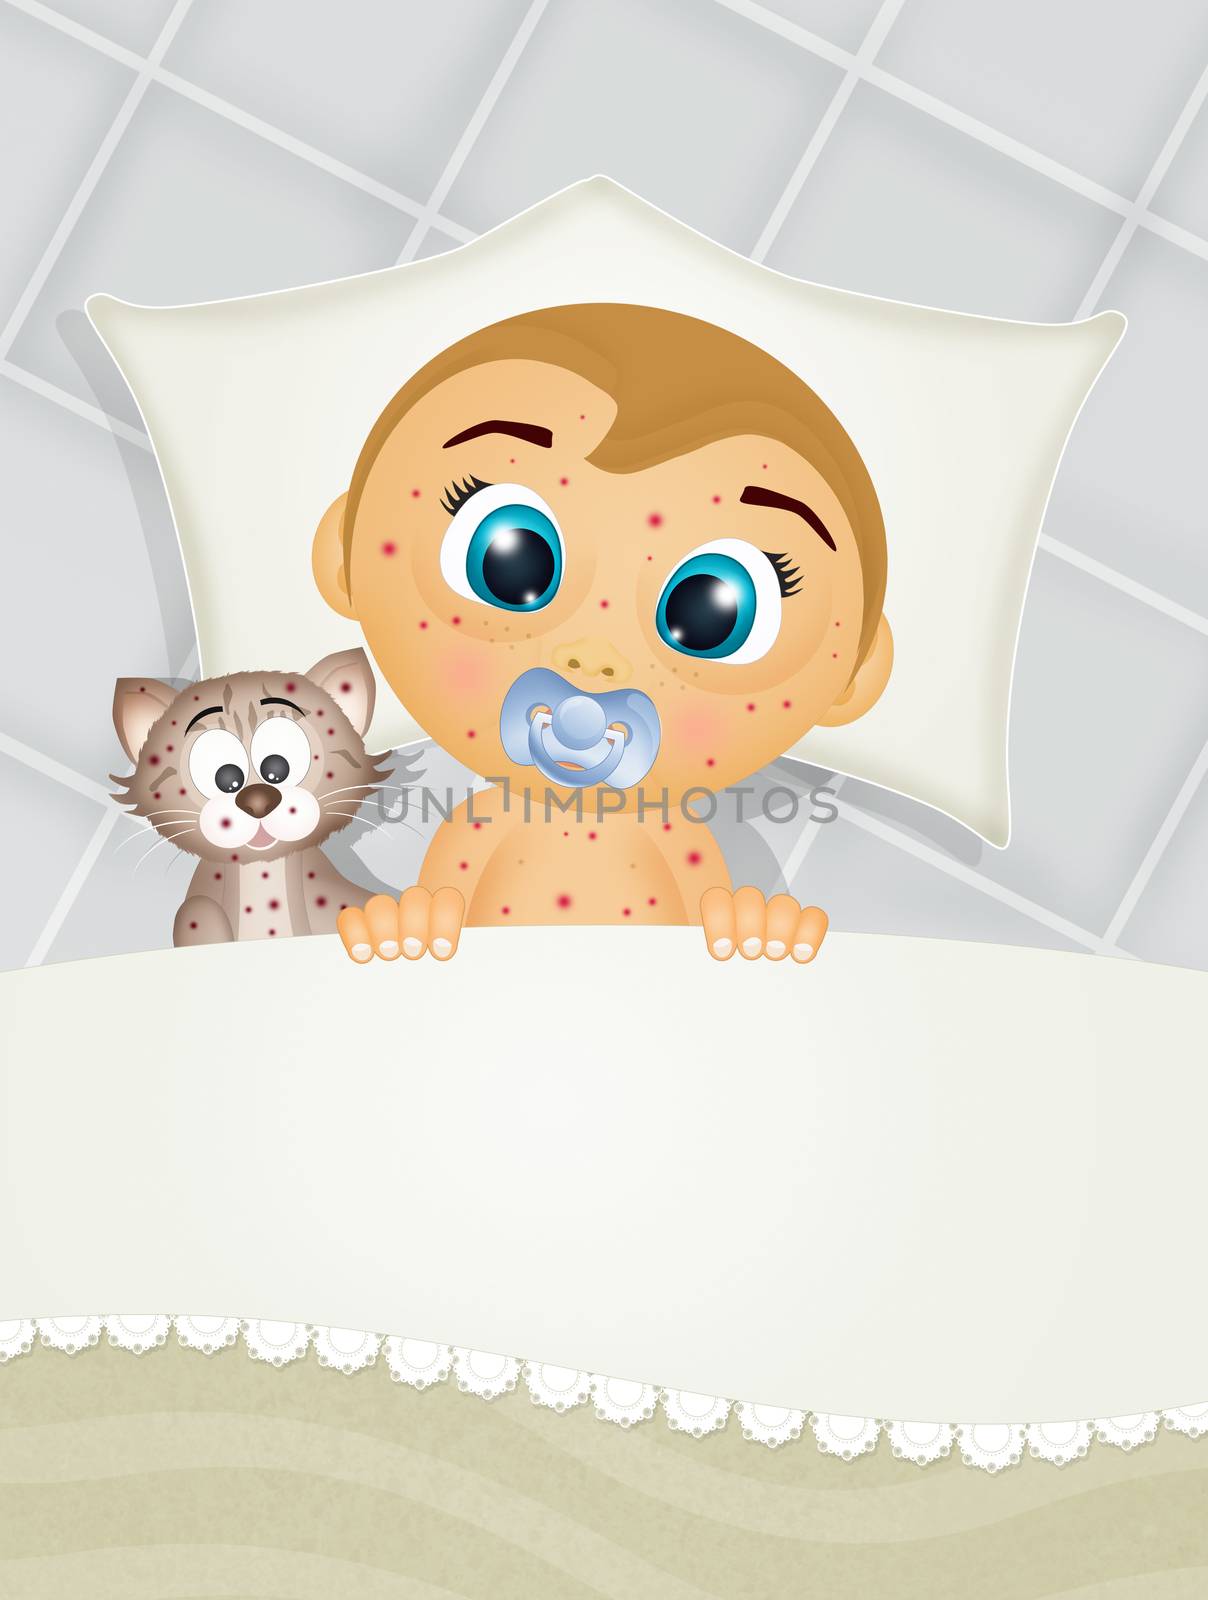 the child and the cat with measles in the bed by adrenalina